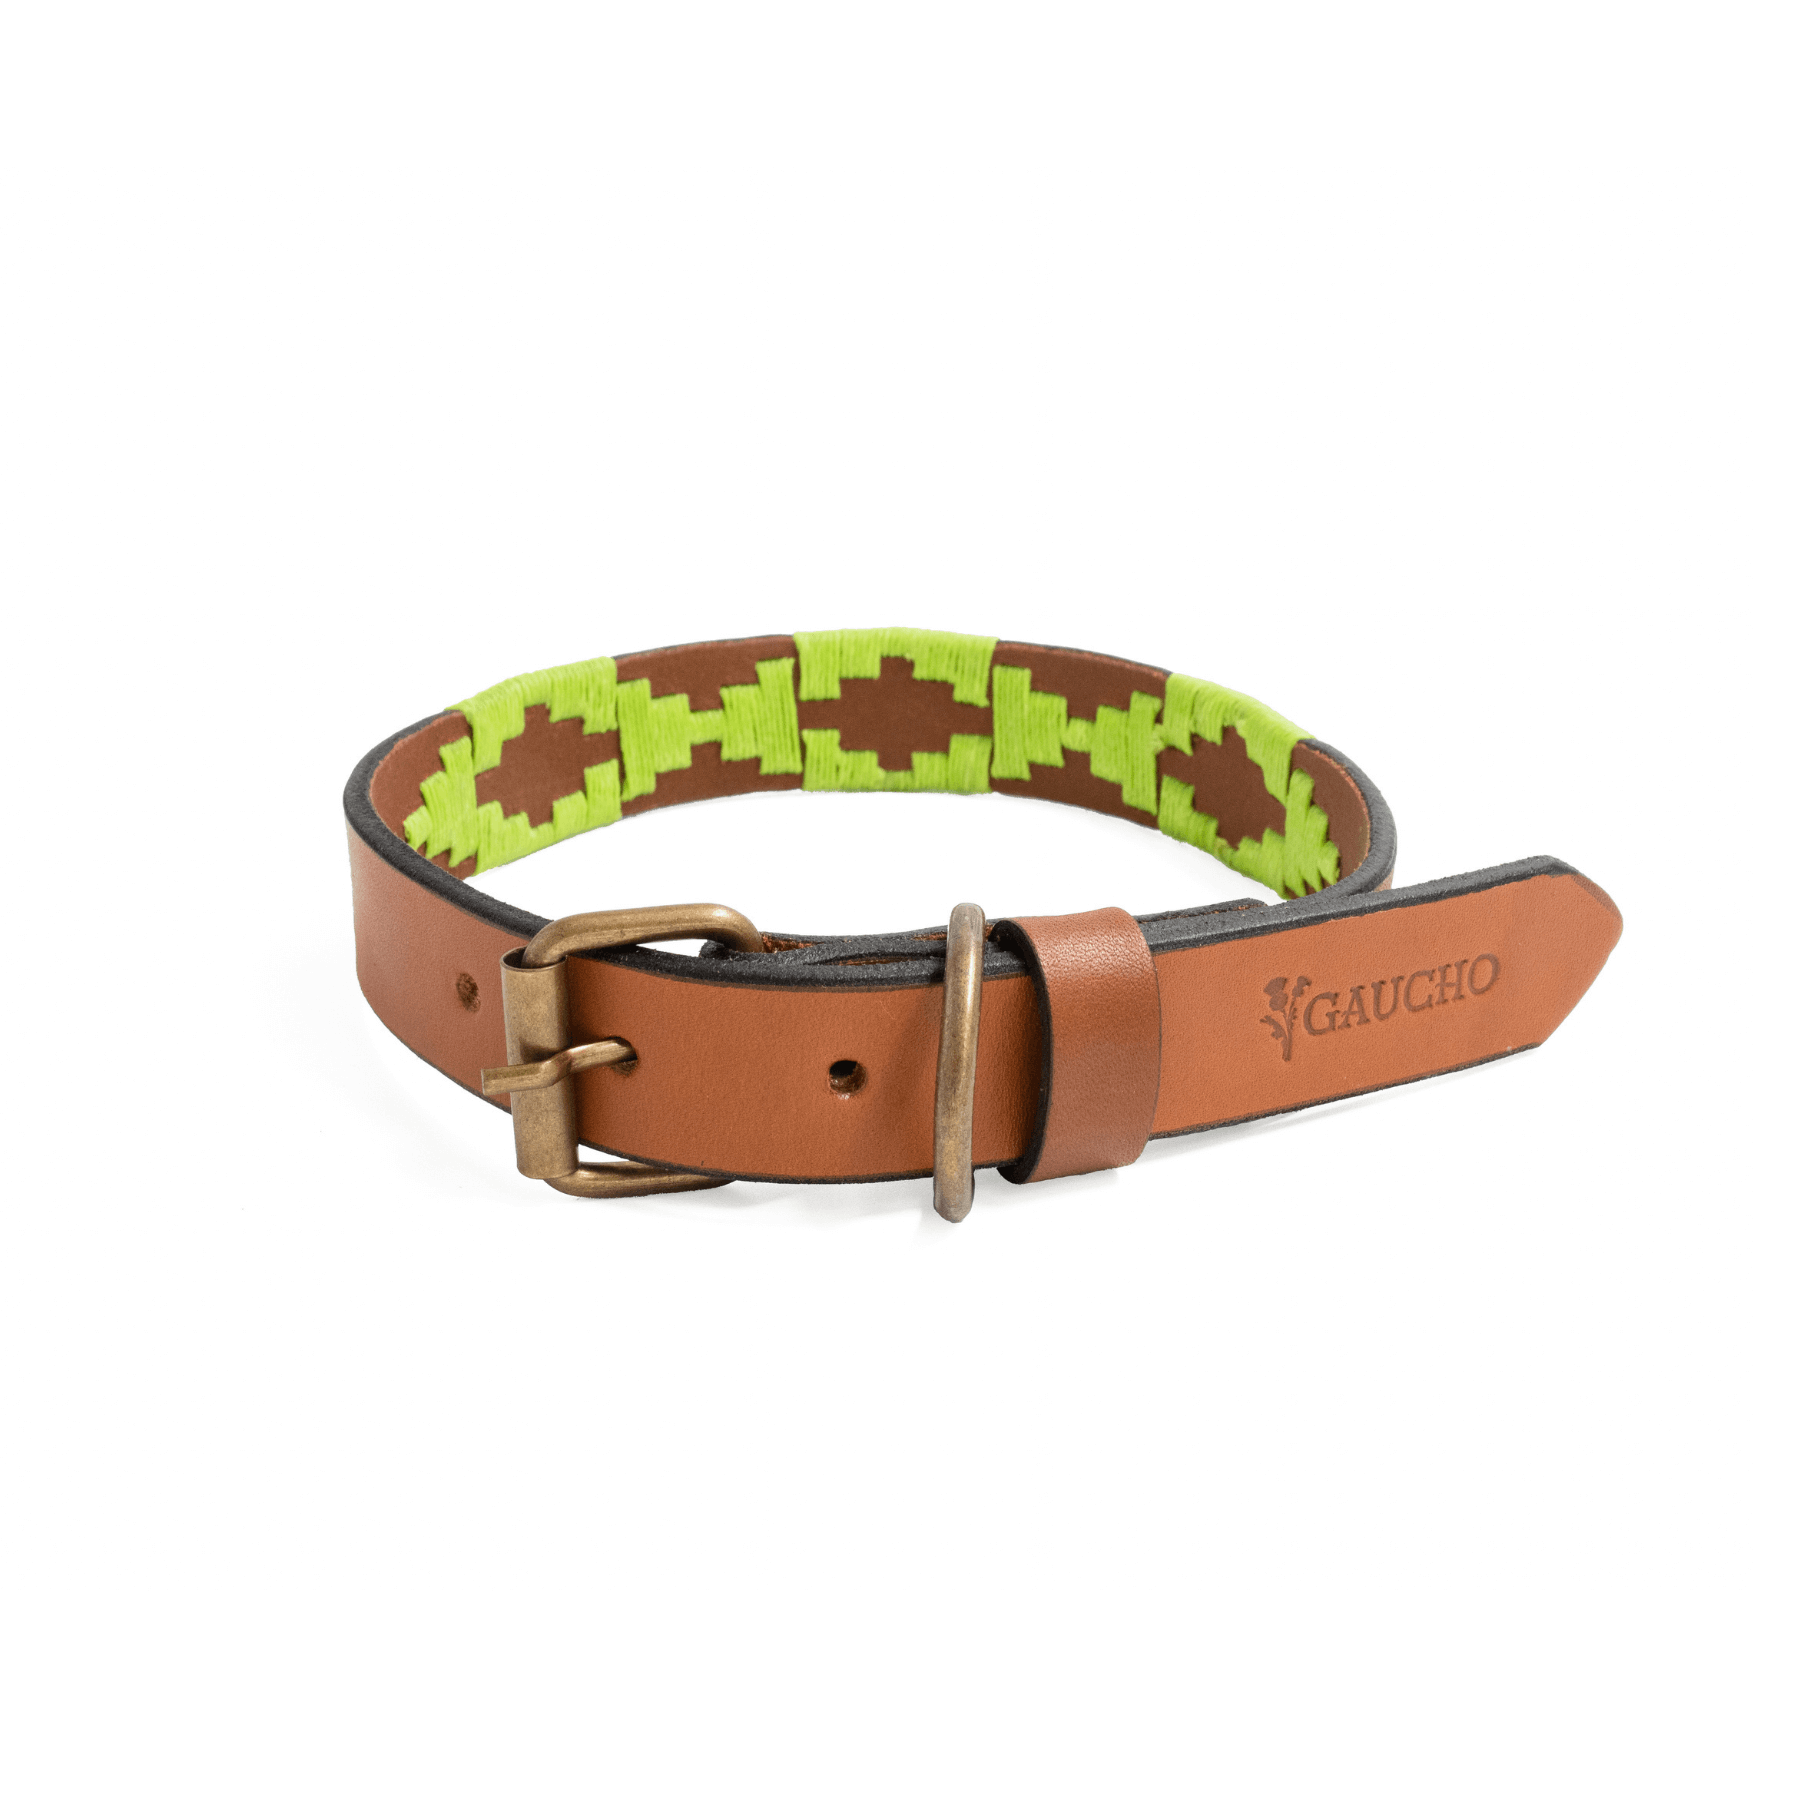 Gaucholife Dogs Embroidered Leather Dog Collar (Apple Green)